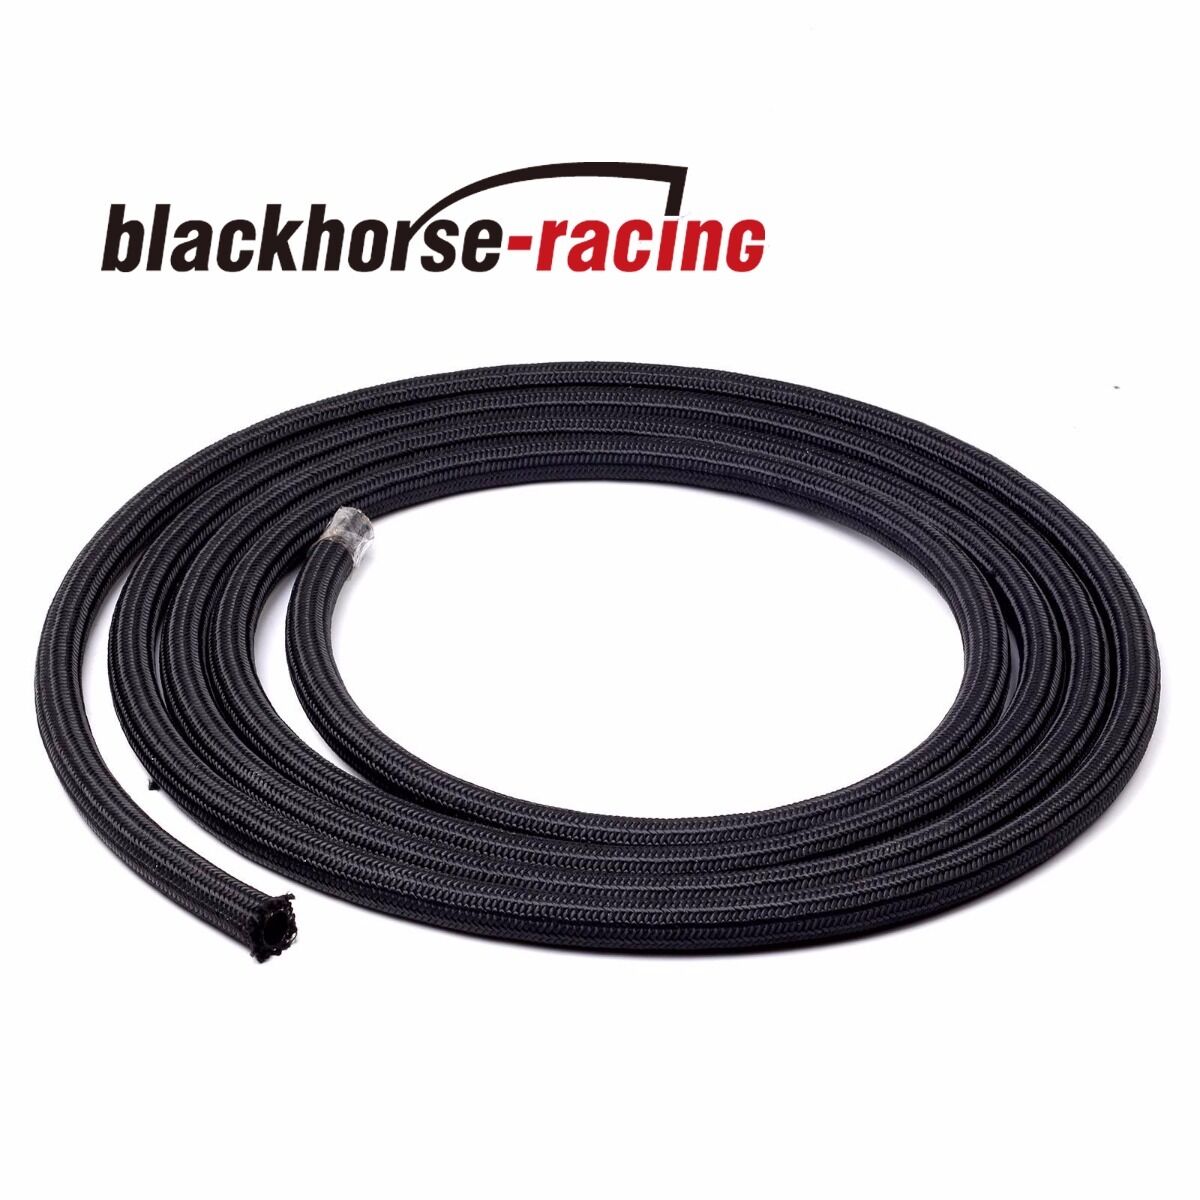 20 Feet AN8 Nylon And Stainless Steel Braided Fuel Oil Gas Line Hose Black